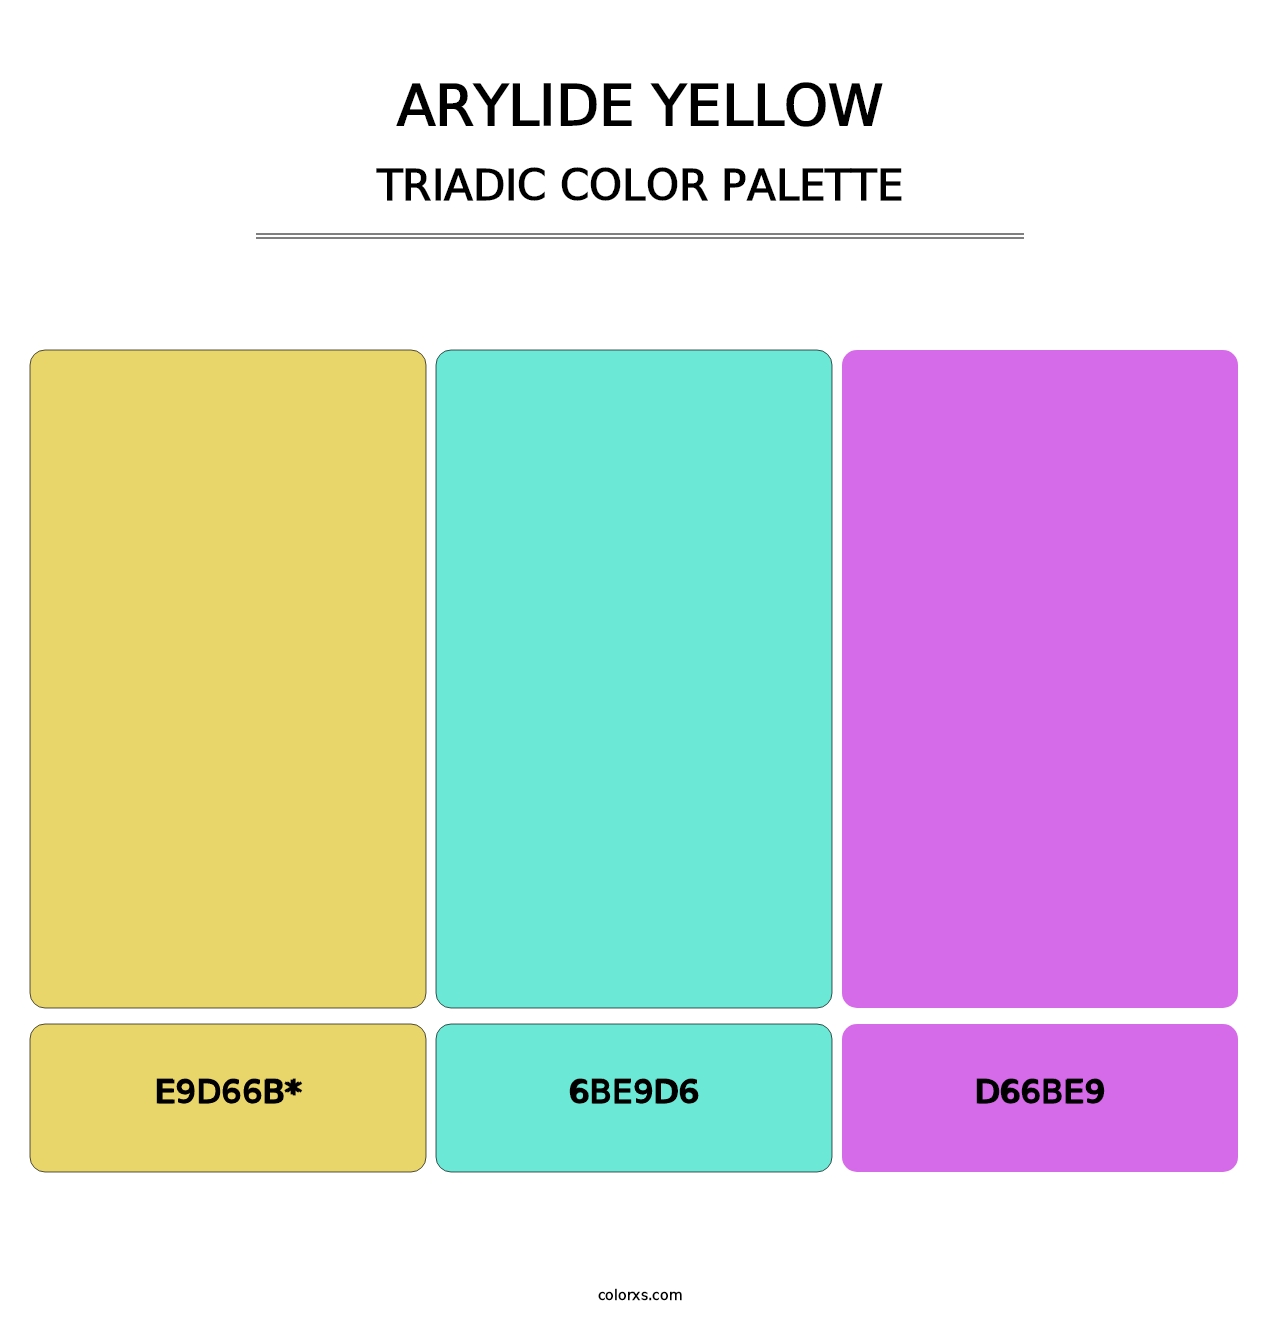 Arylide Yellow - Triadic Color Palette